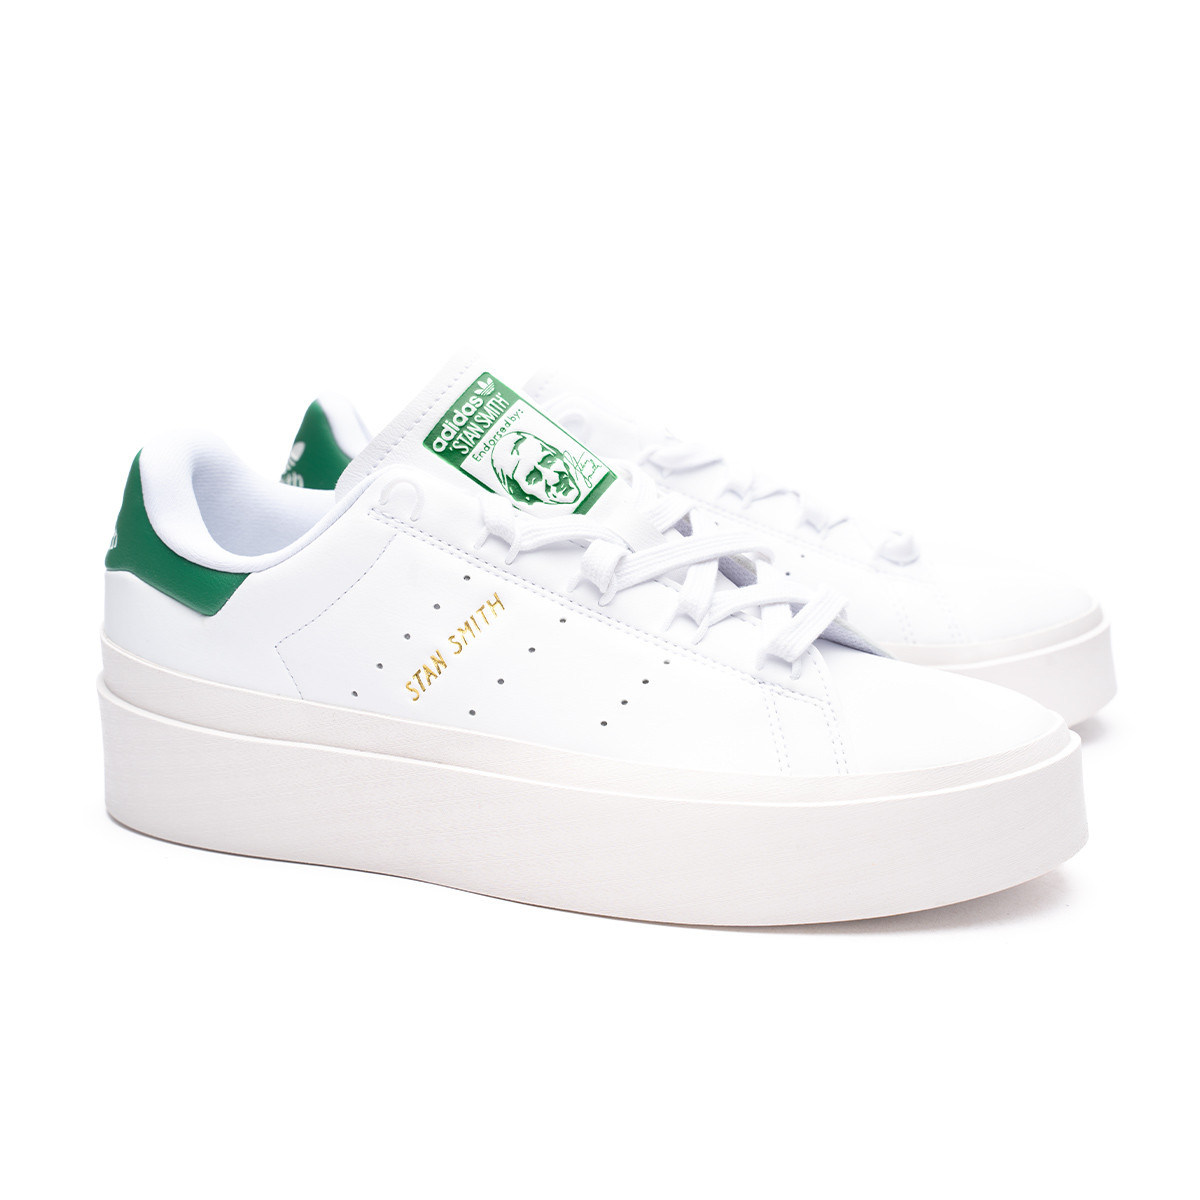 Adidas Stan Smith W Shoes (Trainers)